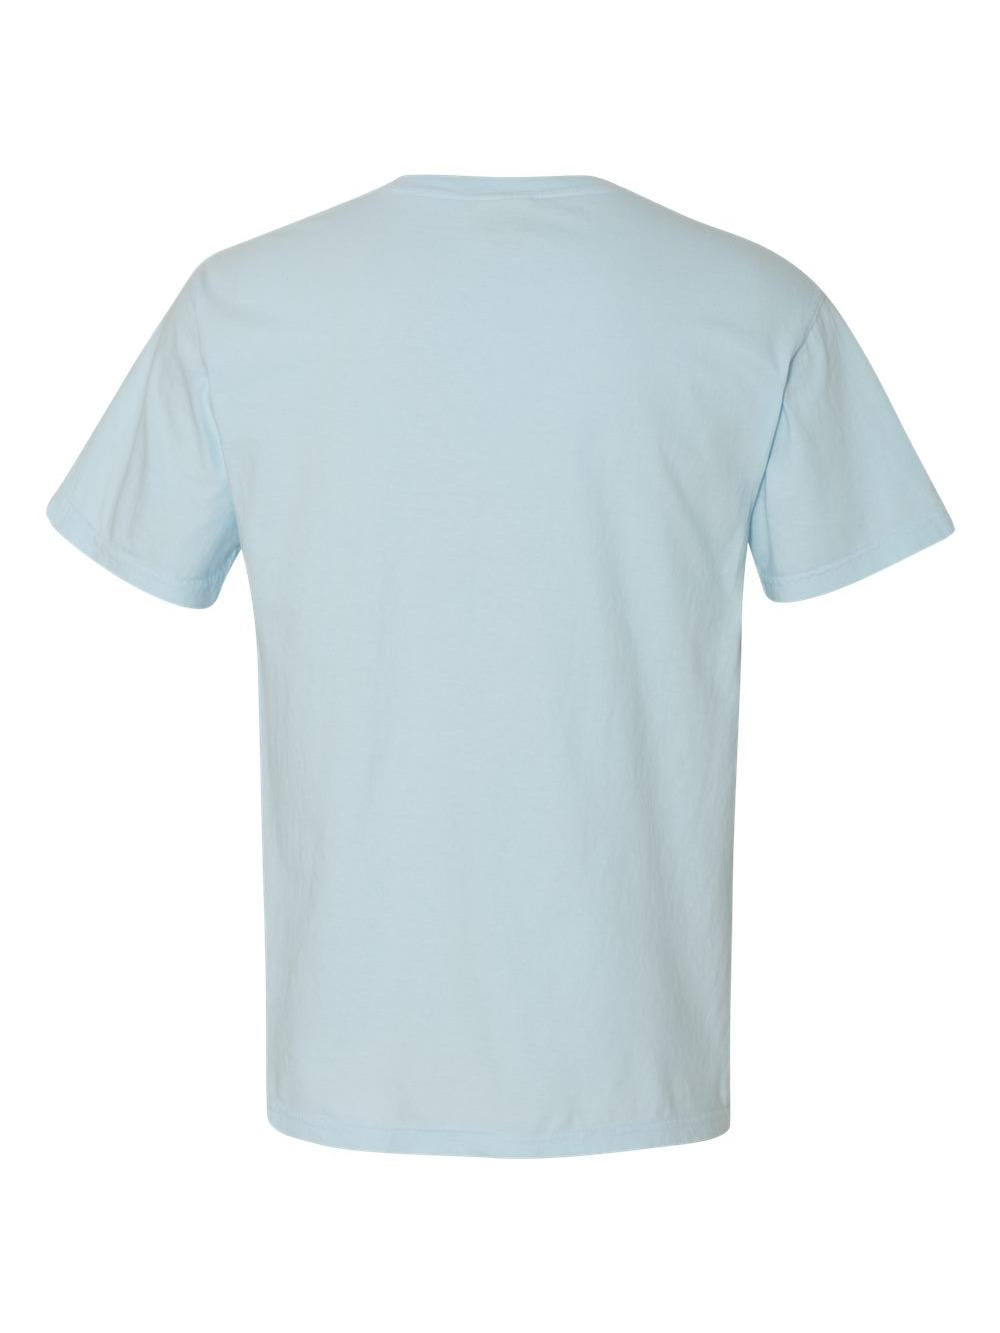 Comfort Colors 1717 Chambray Adult Heavyweight Rs T Shirt